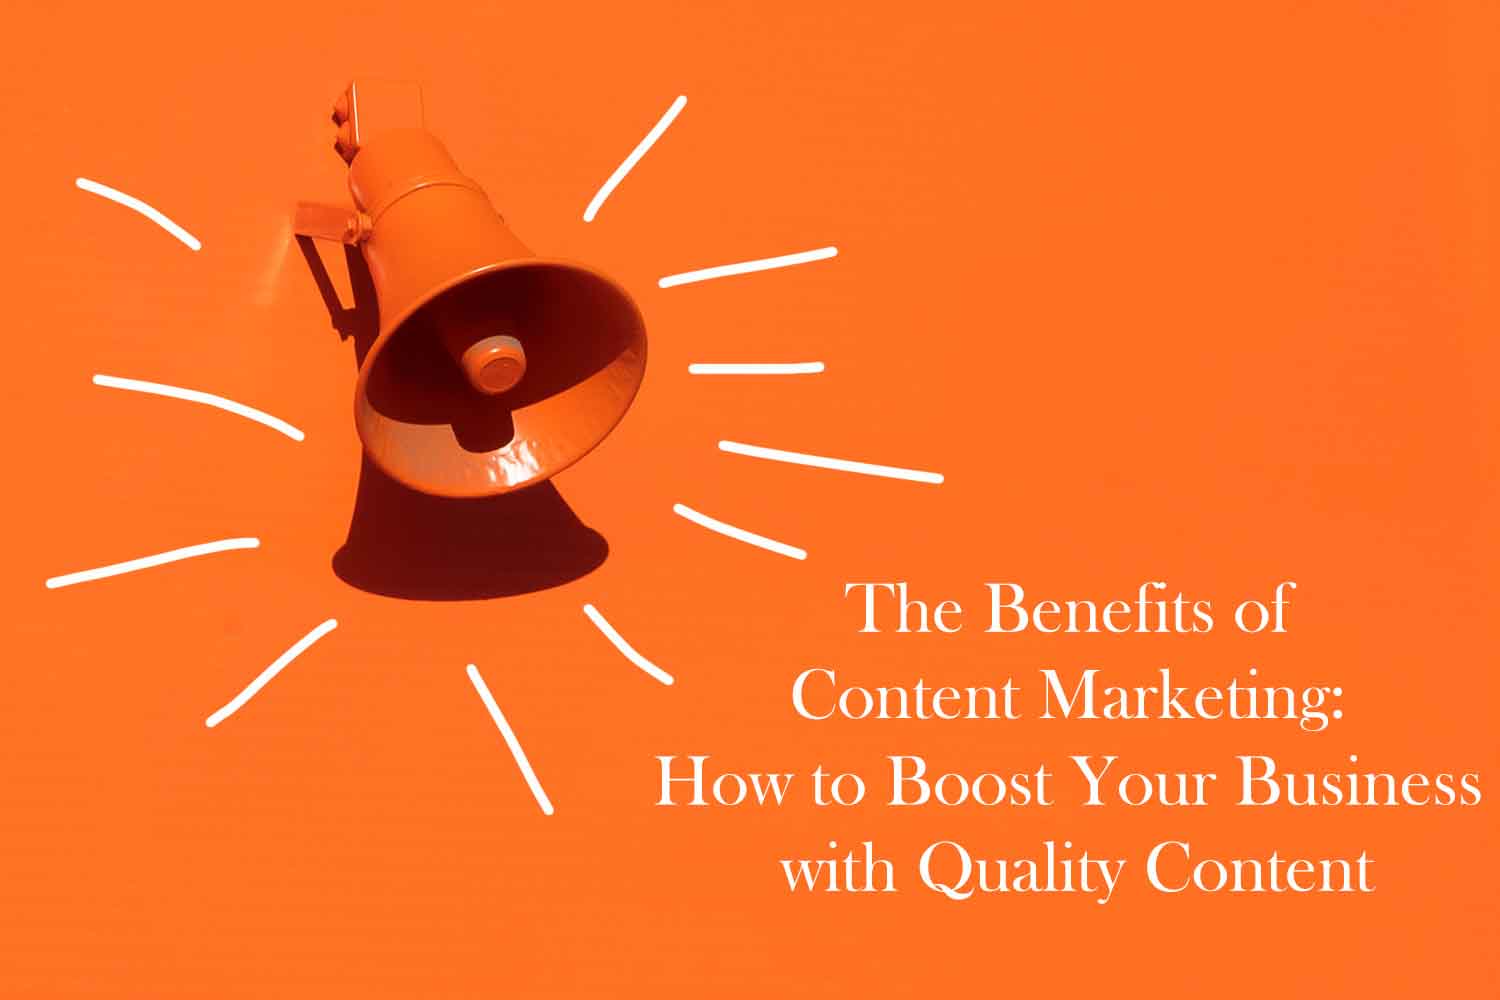 The Benefits of Content Marketing How to Boost Your Business with Quality Content